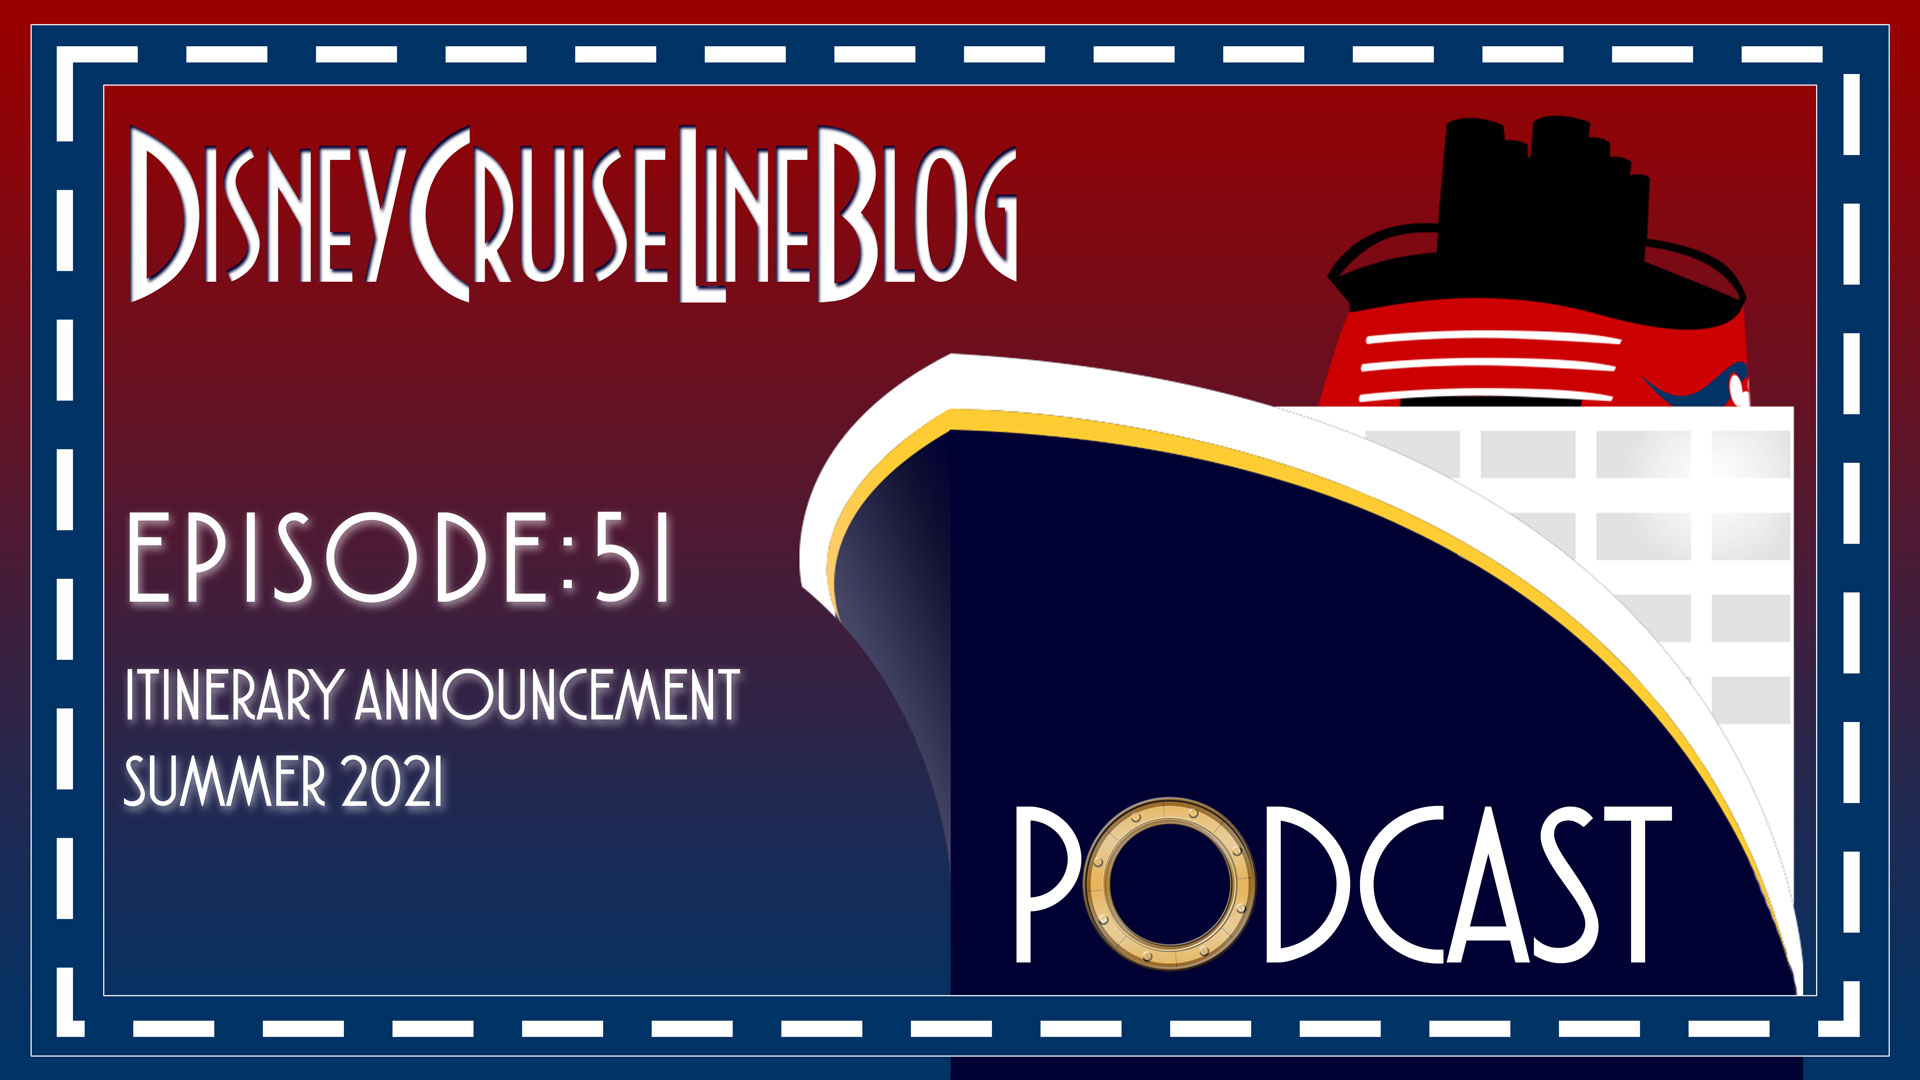 DCL Blog Podcast Episode 51 Itinerary Announcement Summer 2021